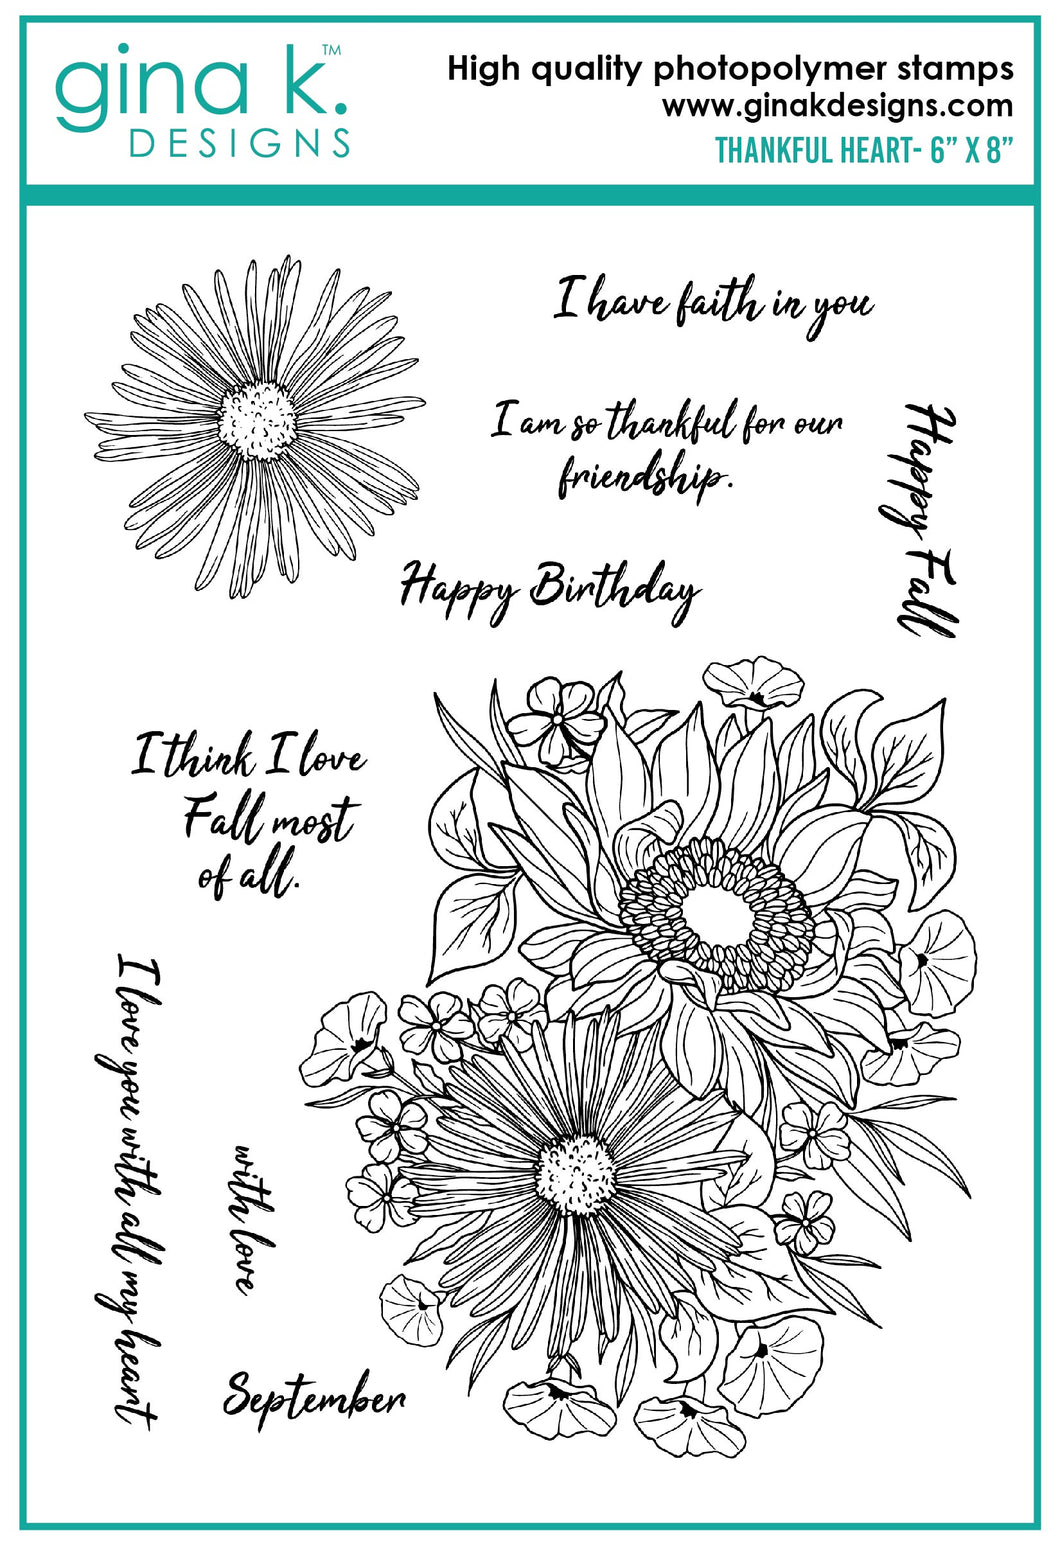 Gina K. Designs - Stamp Set - Thankful Heart. Thankful Heart is a stamp set by Hannah Drapinski. This set is made of premium clear photopolymer and measures 6